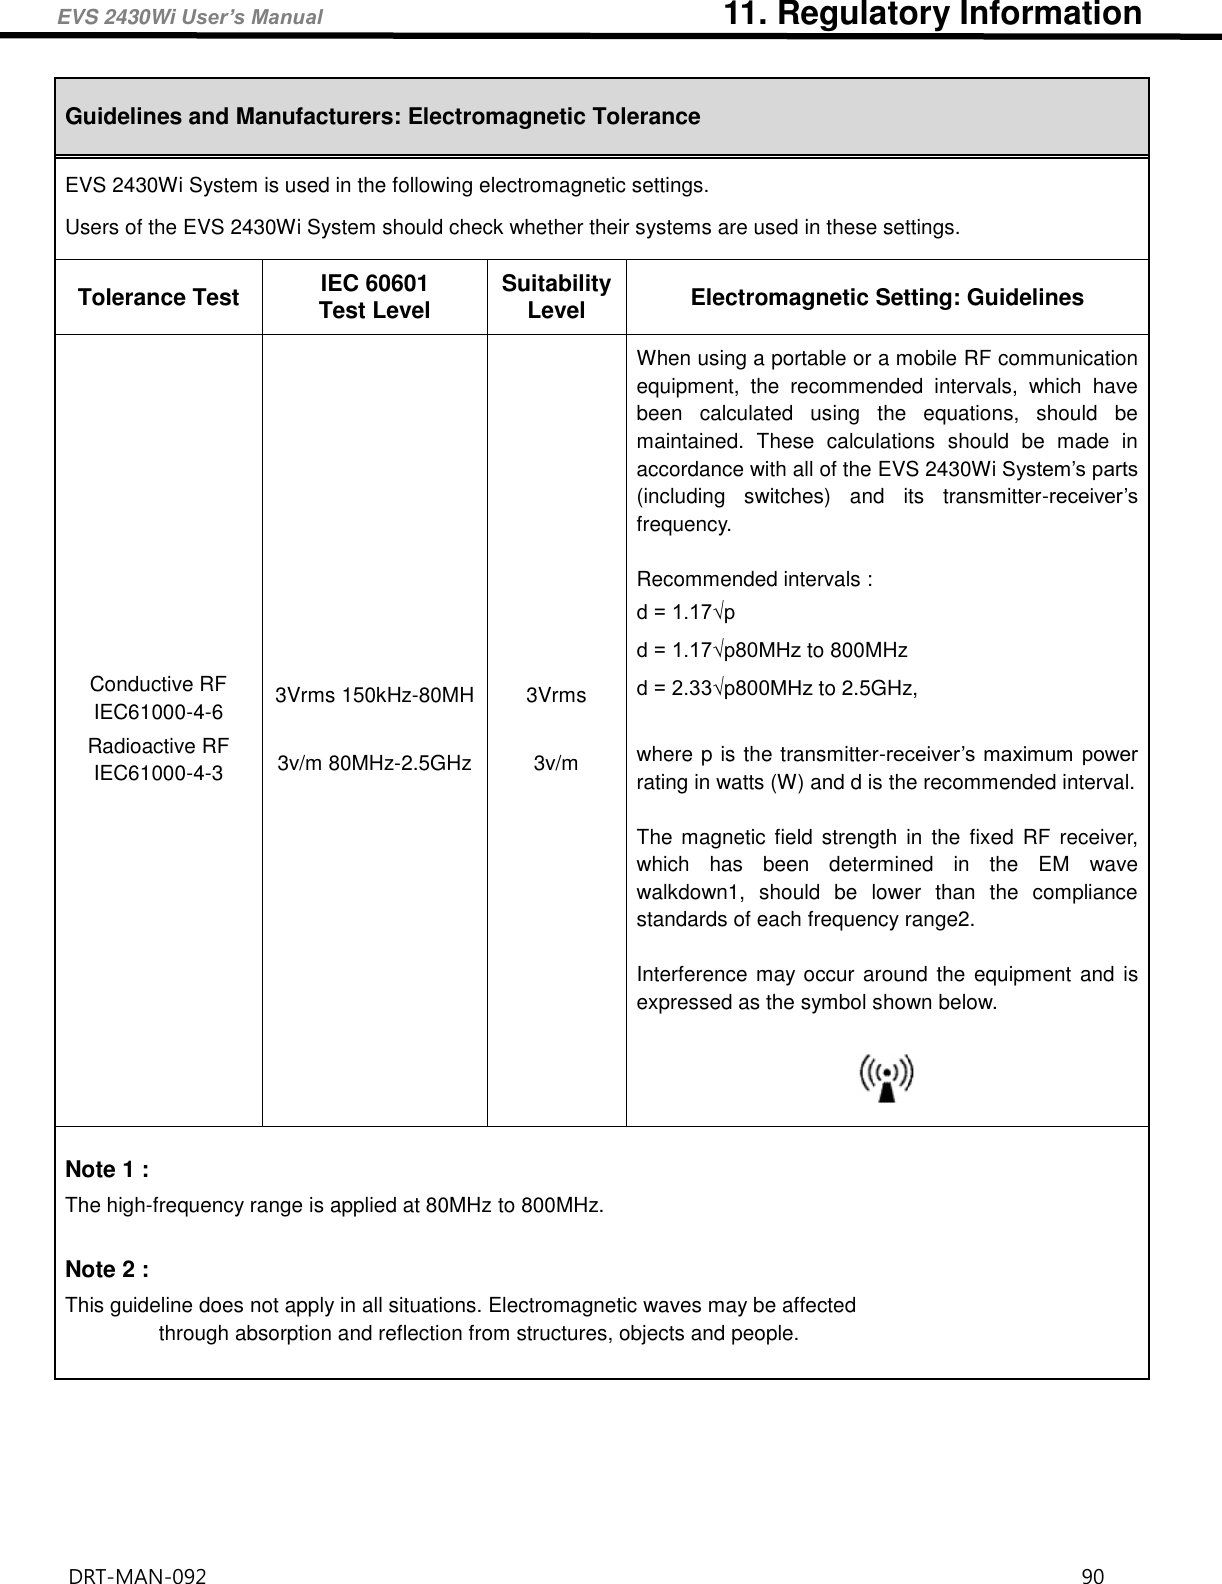 EVS 2430Wi User’s Manual 11. Regulatory InformationDRT-MAN-092  90 Guidelines and Manufacturers: Electromagnetic Tolerance EVS 2430Wi System is used in the following electromagnetic settings. Users of the EVS 2430Wi System should check whether their systems are used in these settings. Tolerance Test IEC 60601 Test Level Suitability Level Electromagnetic Setting: Guidelines Conductive RF IEC61000-4-6 Radioactive RF IEC61000-4-3 3Vrms 150kHz-80MH 3v/m 80MHz-2.5GHz 3Vrms 3v/m When using a portable or a mobile RF communication equipment,  the  recommended  intervals,  which  have been  calculated  using  the  equations,  should  be maintained.  These  calculations  should  be  made  in accordance with all of the EVS 2430Wi System’s parts (including  switches)  and  its  transmitter-receiver’s frequency. Recommended intervals : d = 1.17√p d = 1.17√p80MHz to 800MHz d = 2.33√p800MHz to 2.5GHz, where p is the transmitter-receiver’s maximum power rating in watts (W) and d is the recommended interval. The magnetic field  strength in  the  fixed RF  receiver, which  has  been  determined  in  the  EM  wave walkdown1,  should  be  lower  than  the  compliance standards of each frequency range2. Interference may occur  around  the equipment  and  is expressed as the symbol shown below. Note 1 : The high-frequency range is applied at 80MHz to 800MHz. Note 2 : This guideline does not apply in all situations. Electromagnetic waves may be affected through absorption and reflection from structures, objects and people. 